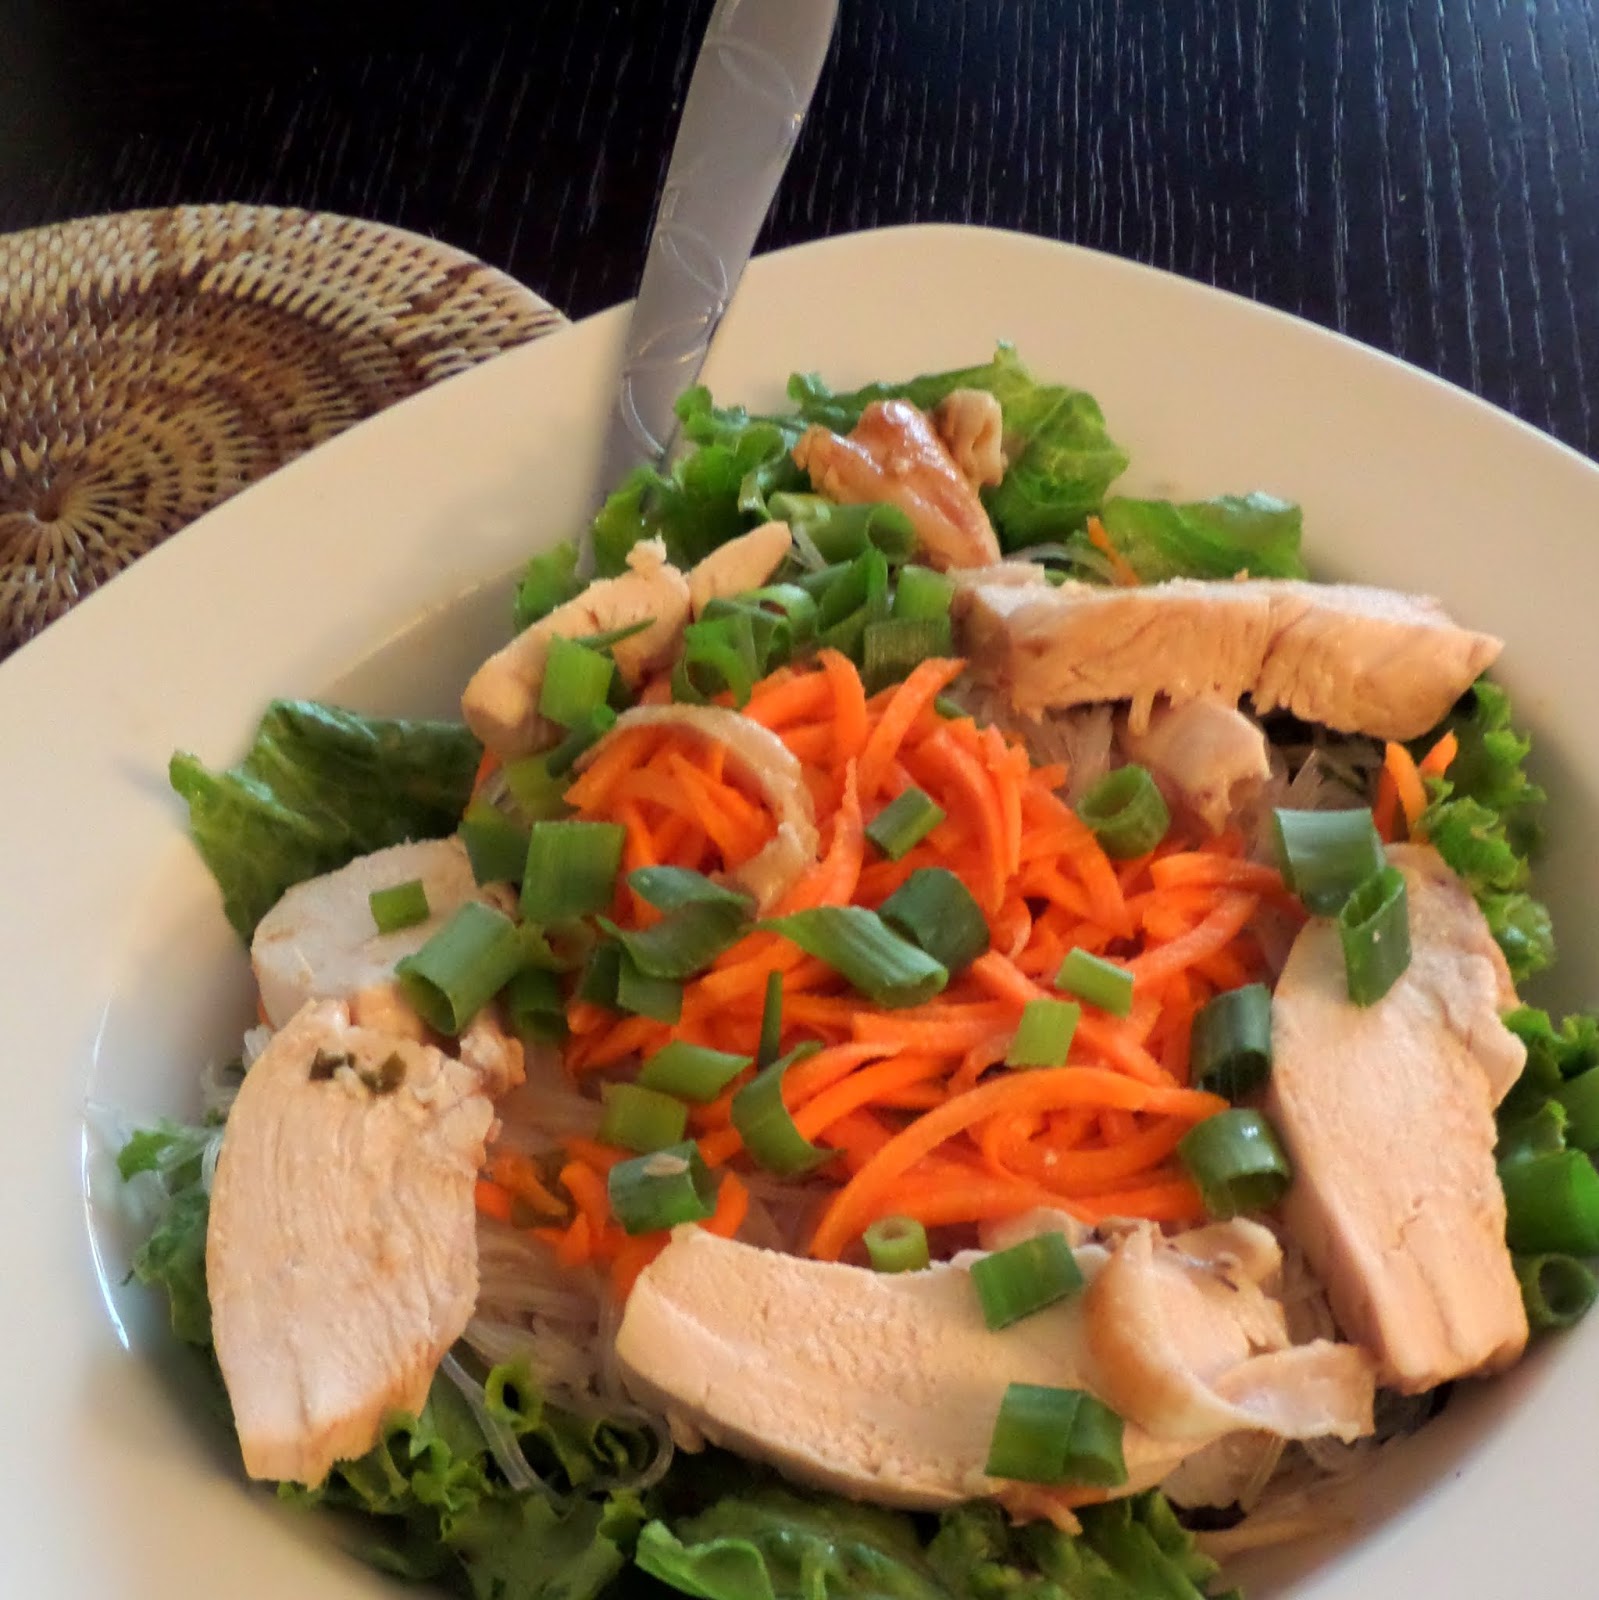 Lemongrass Chicken Vermicelli:  A fresh salad with herbs, vegetables, and rice noodles topped with juicy chicken flavored with lemongrass and other southeast Asian flavors.